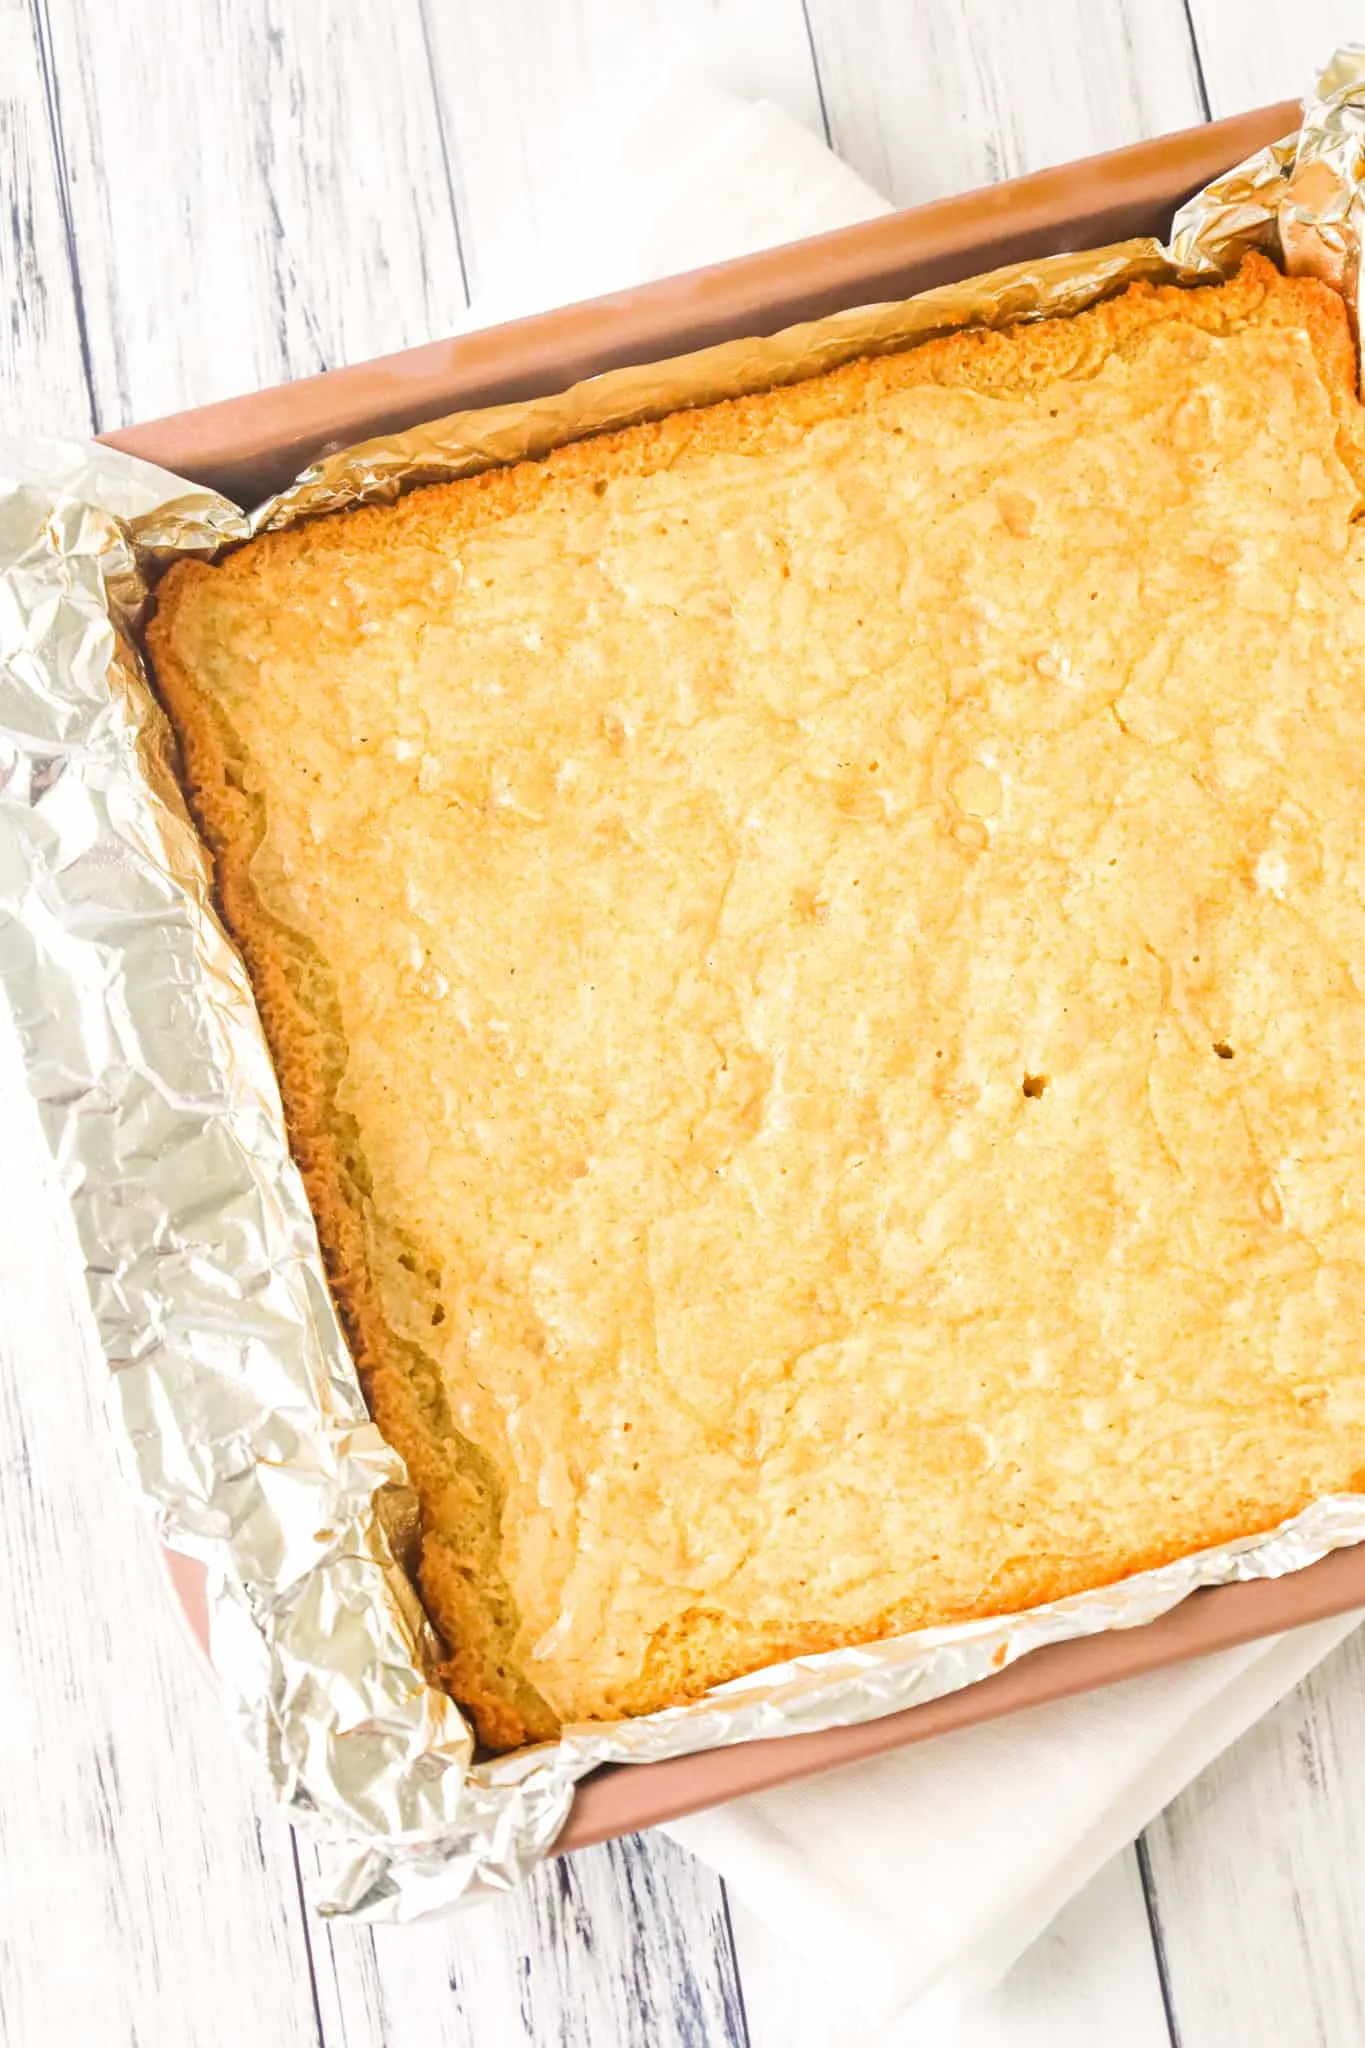 Vanilla Brownies are delicious chewy blonde brownies loaded with white chocolate chips.